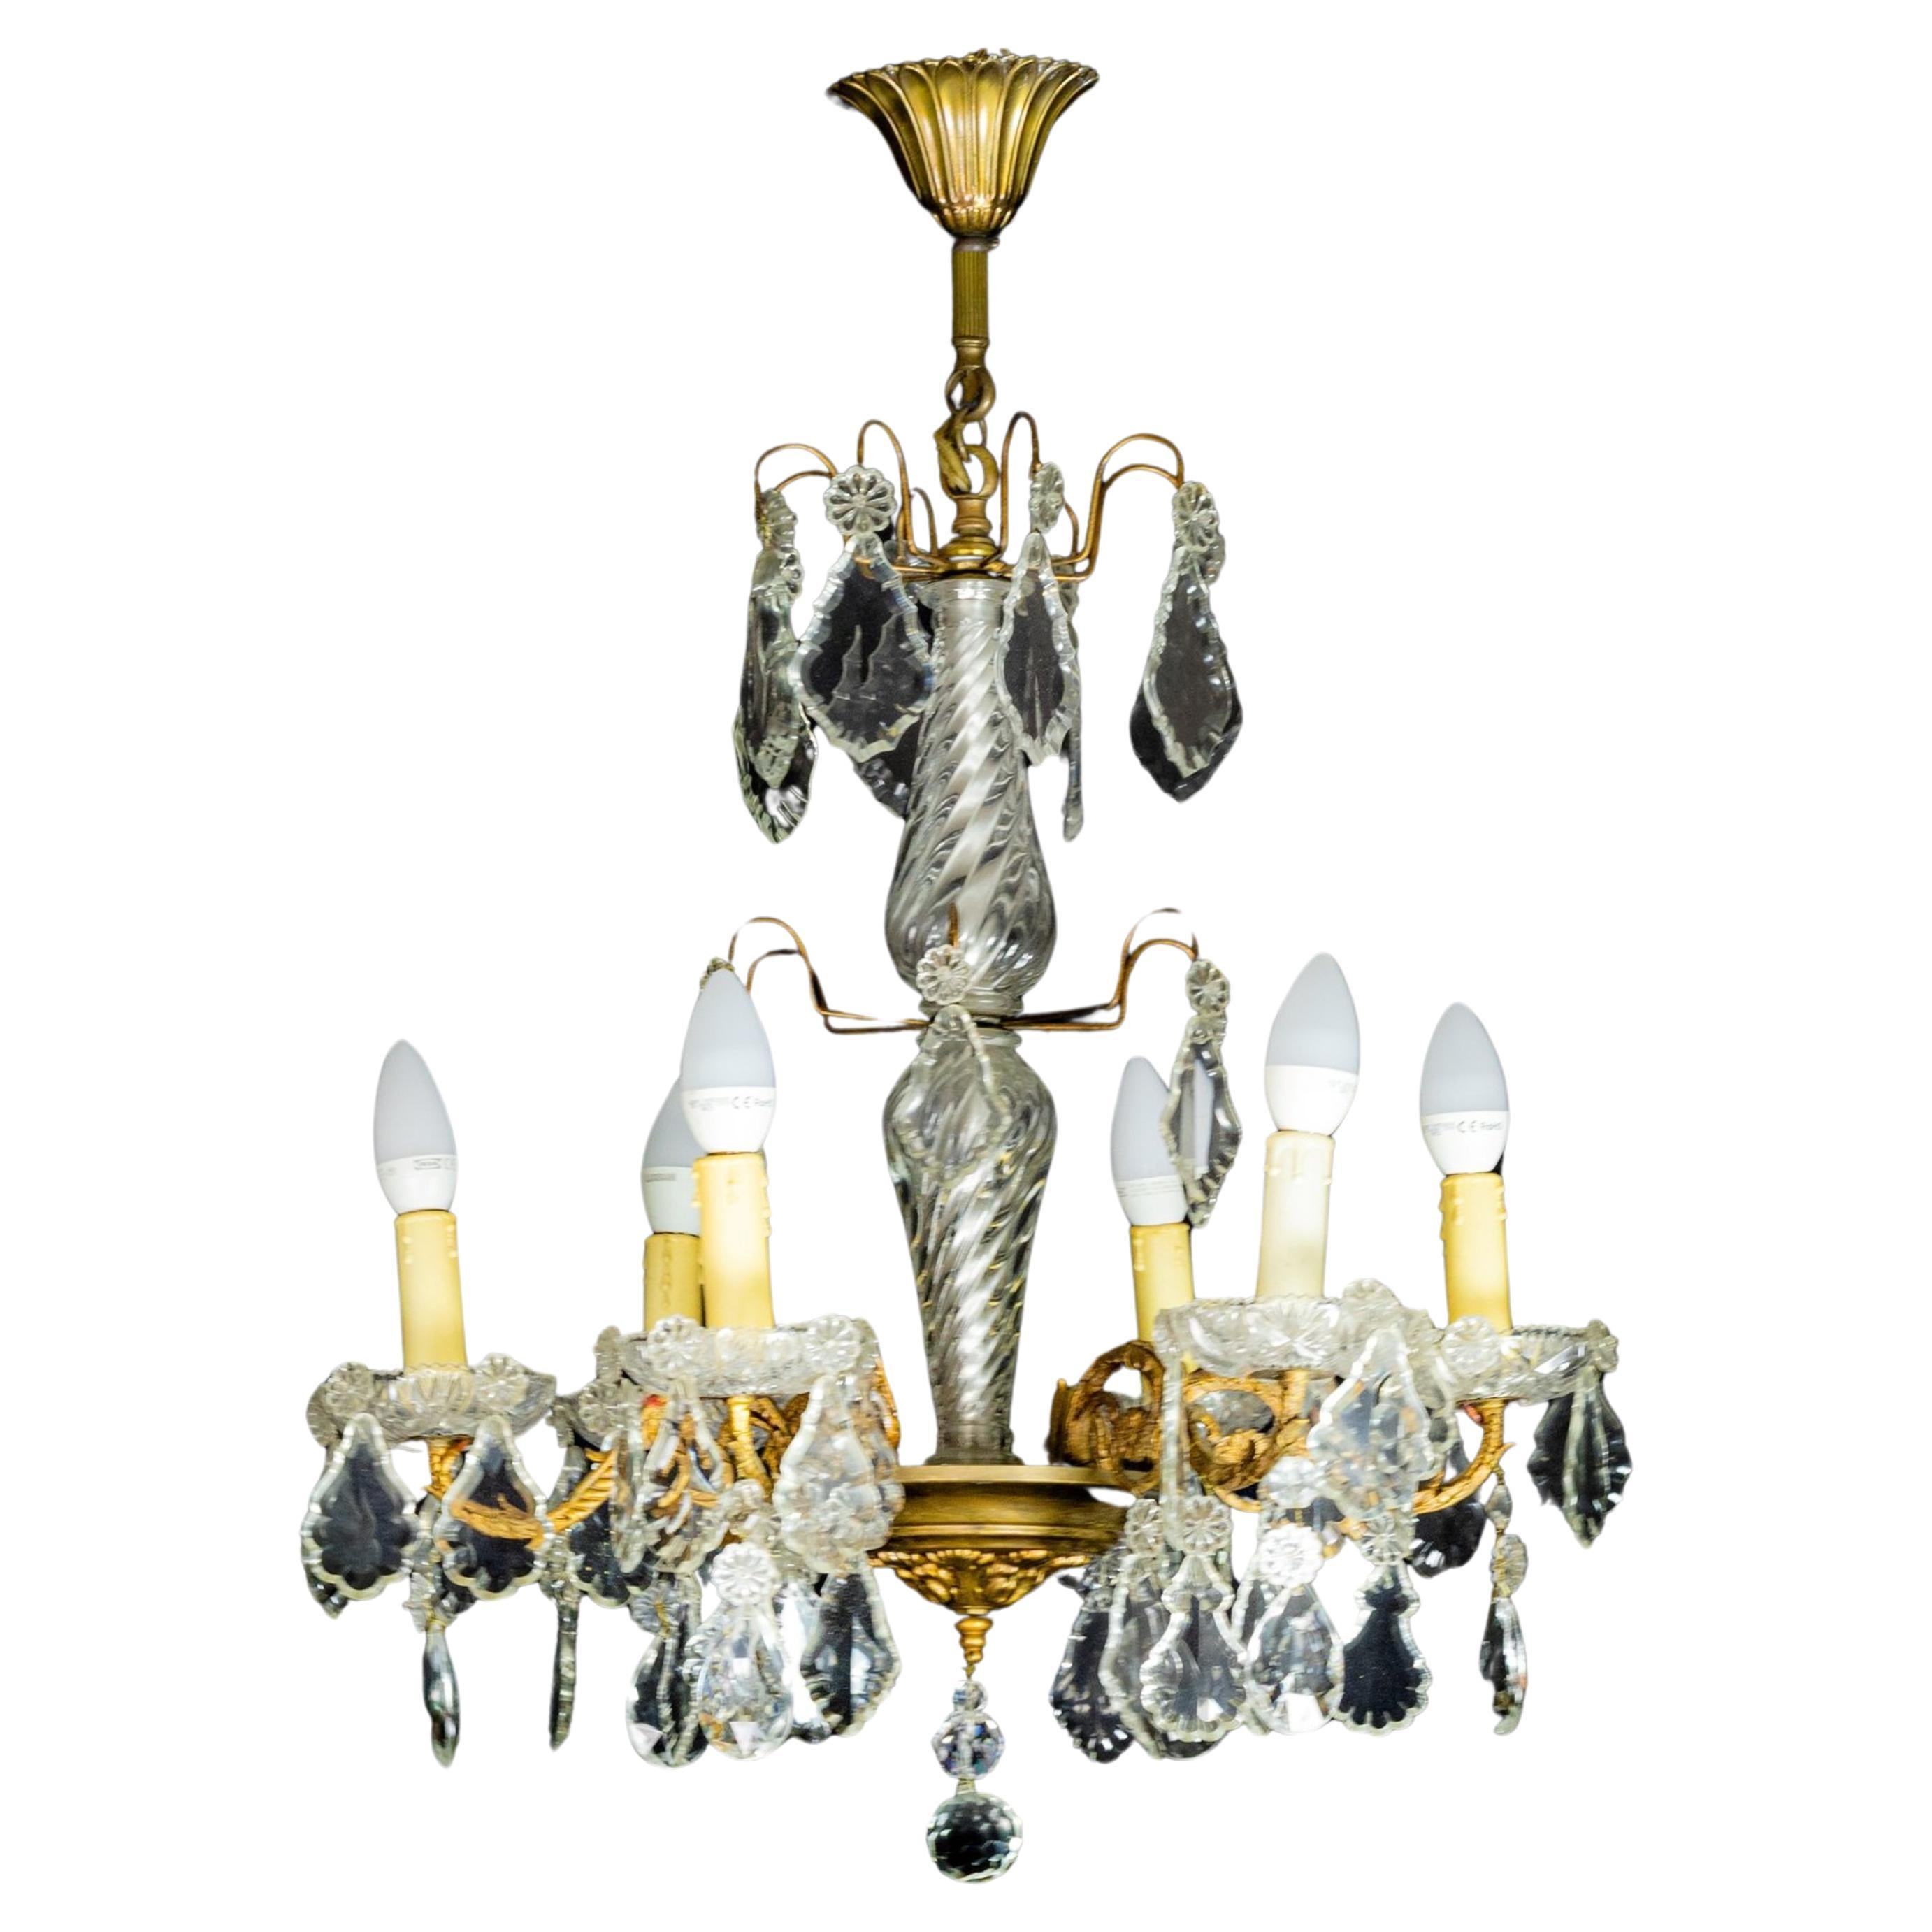 A Louis XV-Style bronze styled chandelier with crystal pendants and finials and tinted glass, completed and rewired with
candlestick holders and six light sockets. Rewired.

The chandelier is currently wired for both European Union and US standards